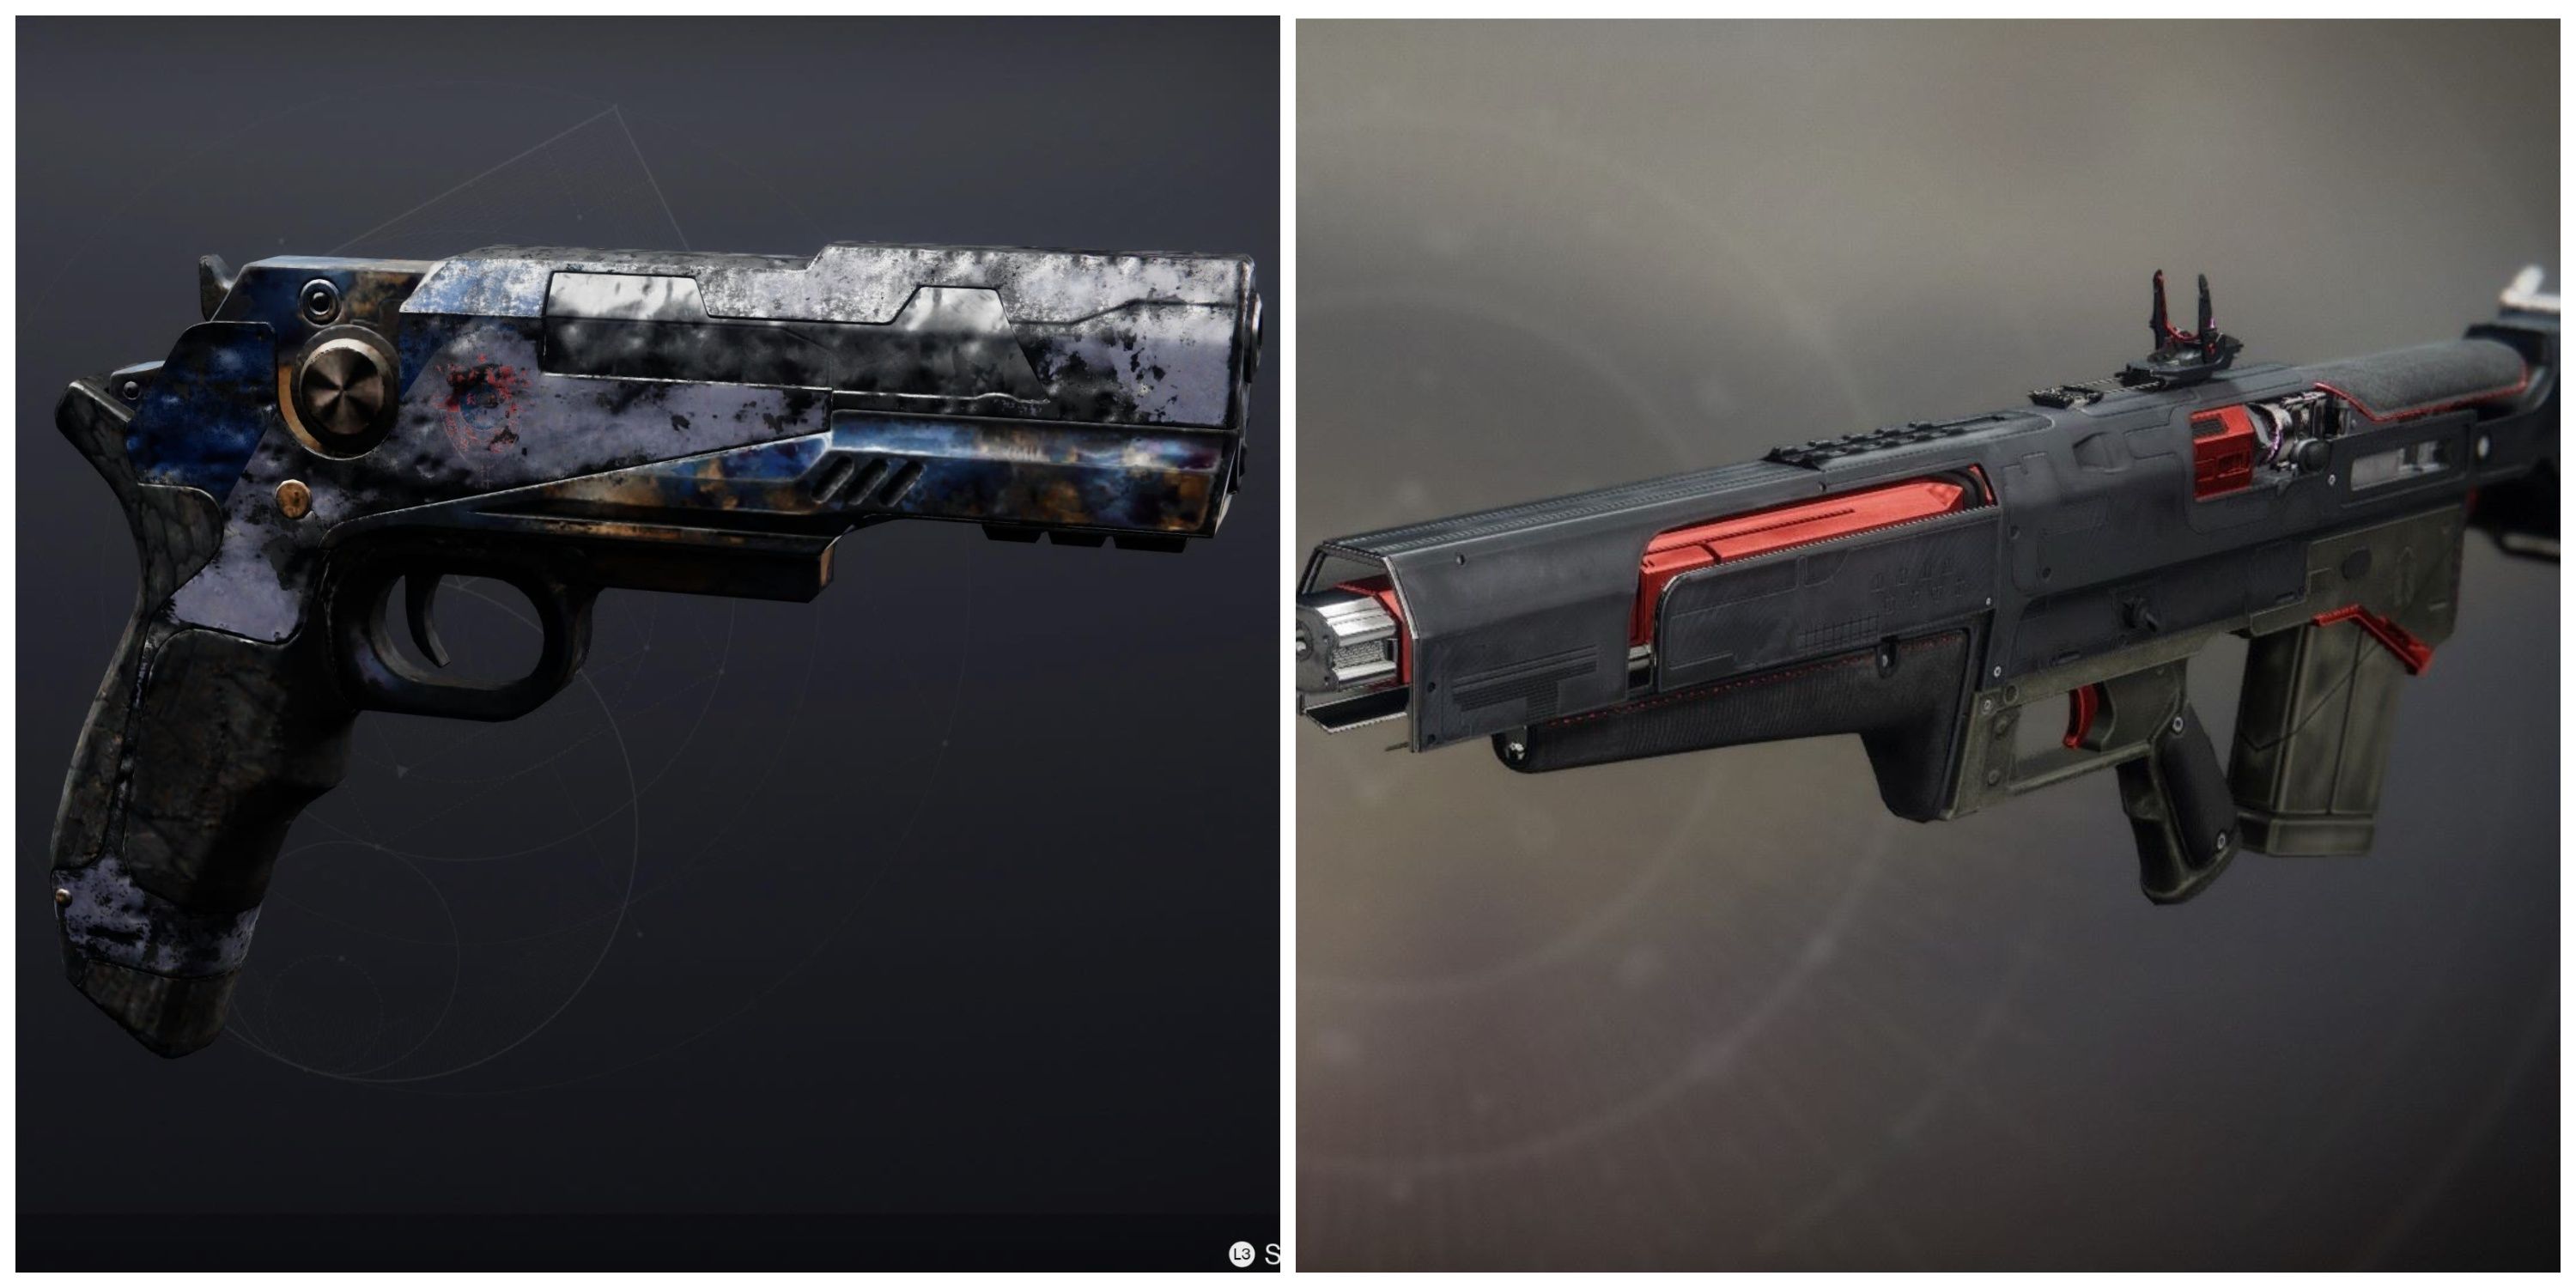 traveller's chosen (damaged) and blast furnace weapons in destiny 2